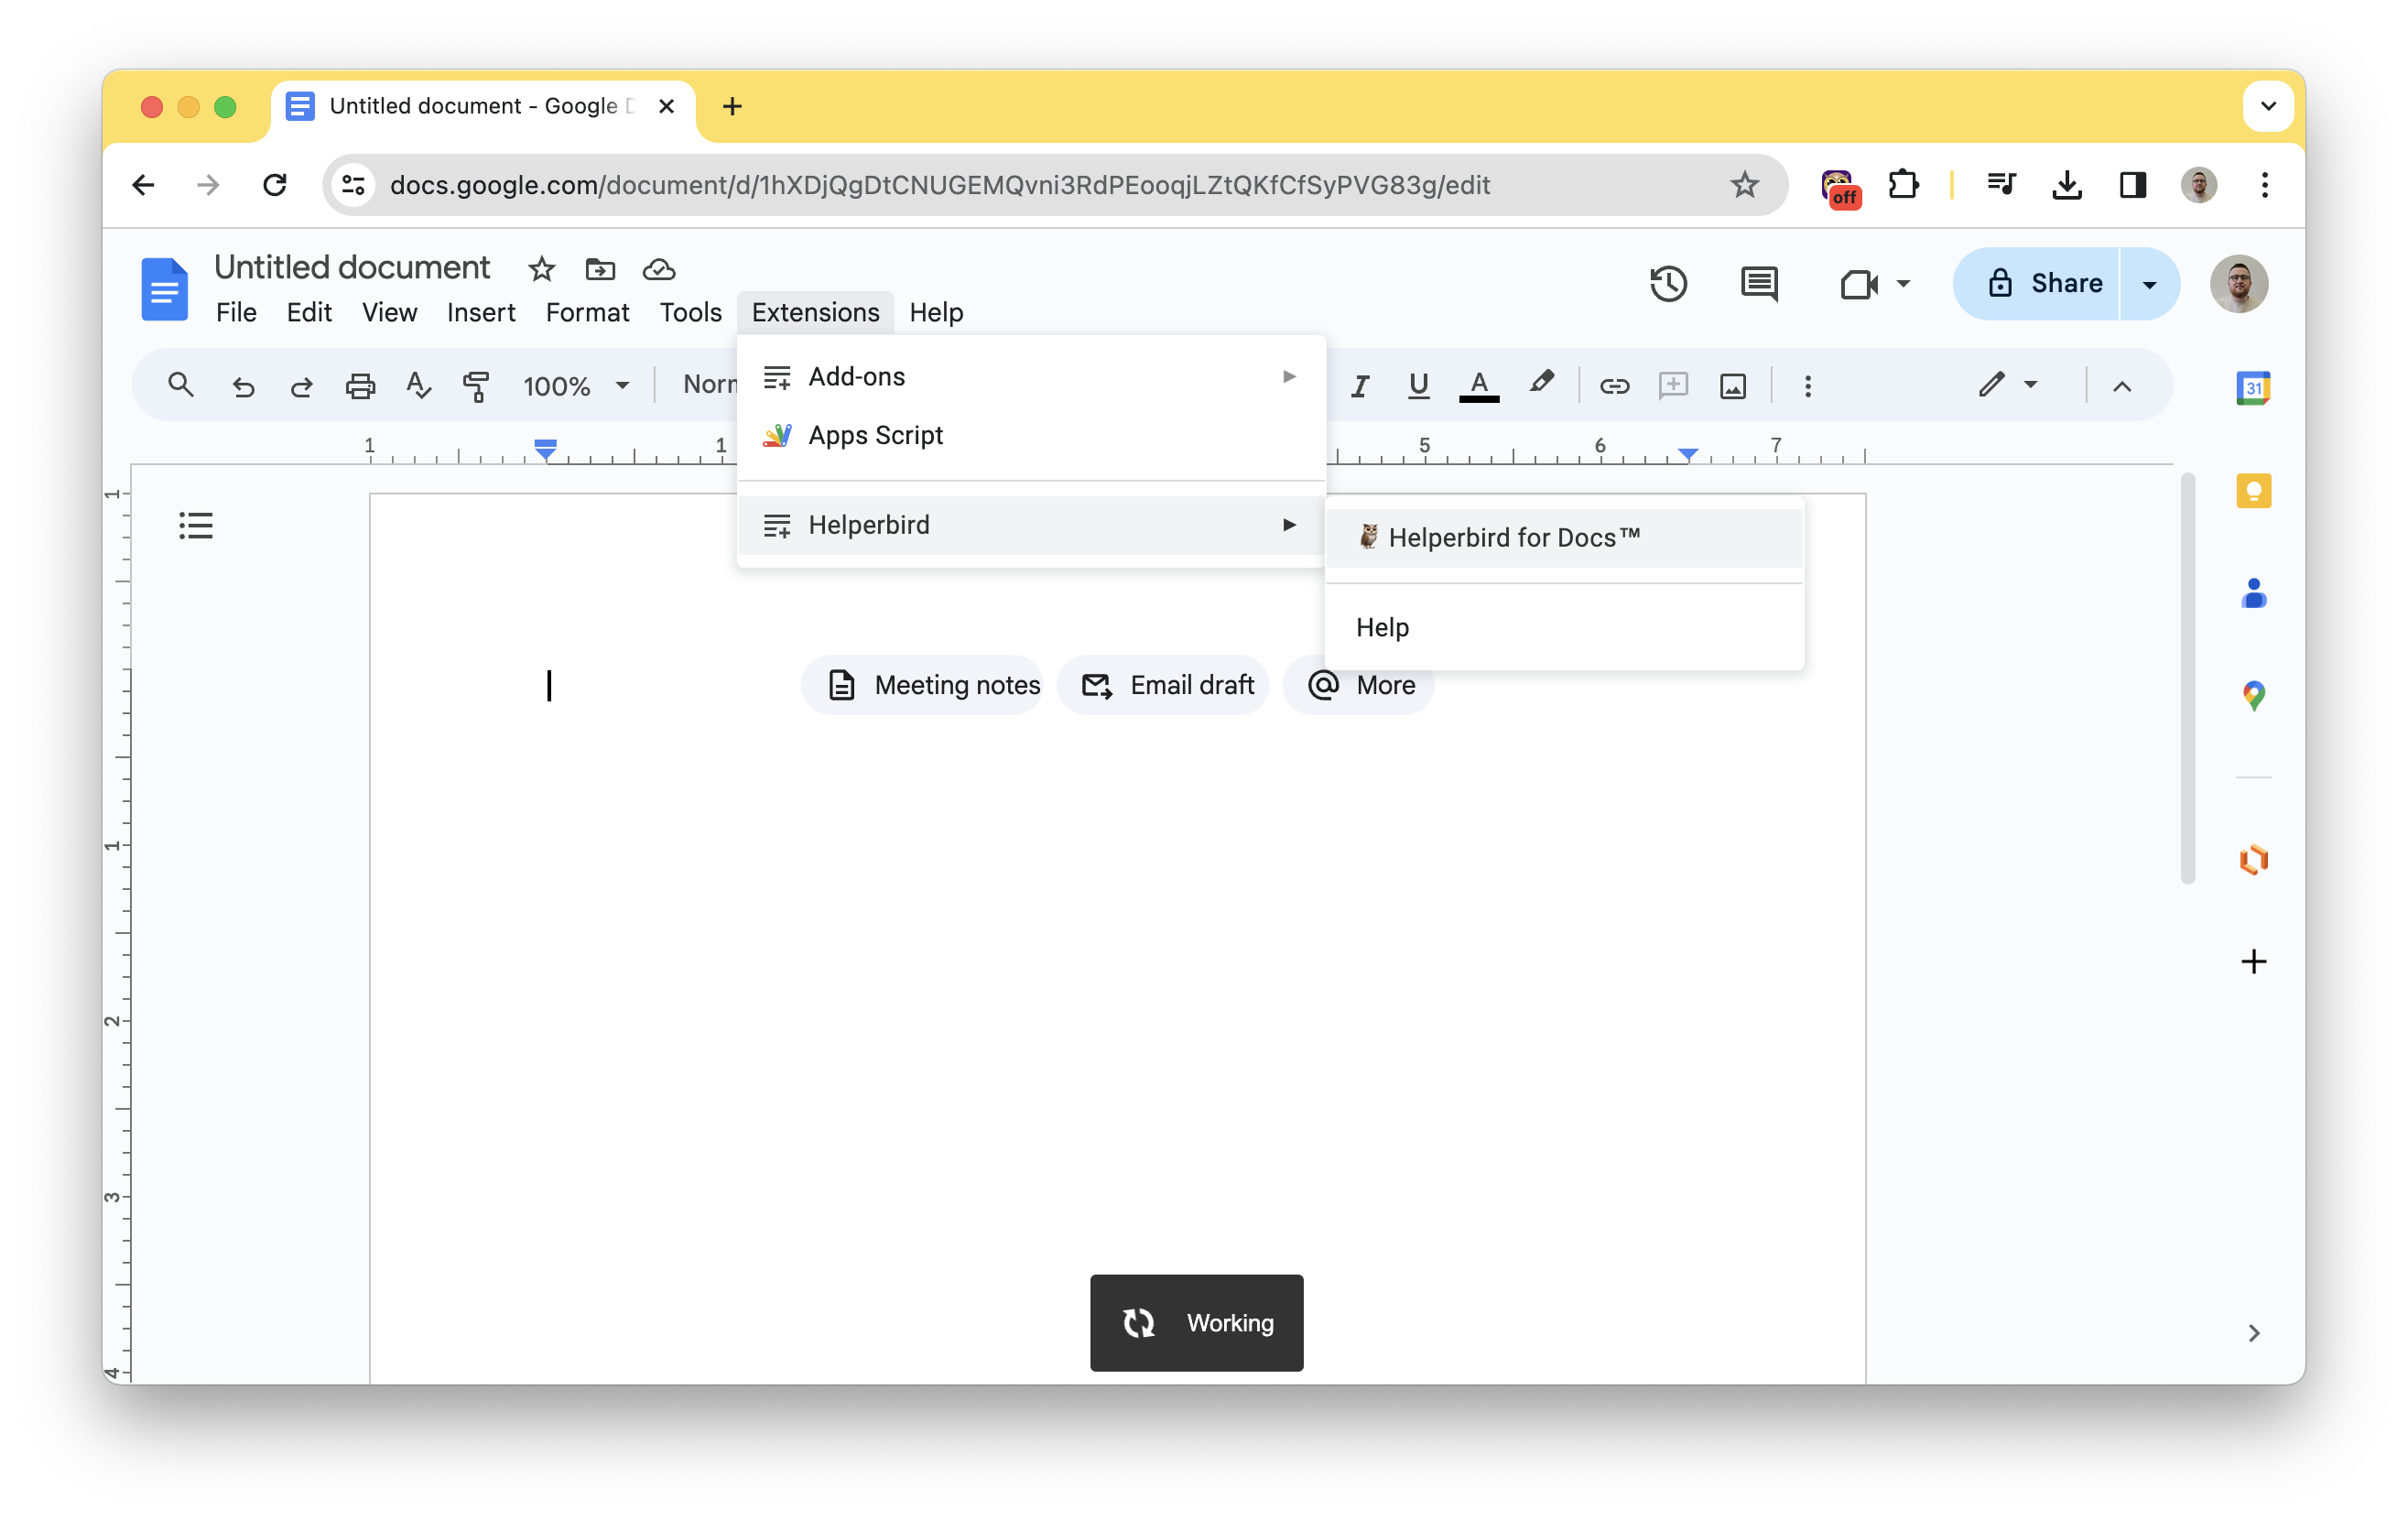 How to use Immersive reader on Google Docs